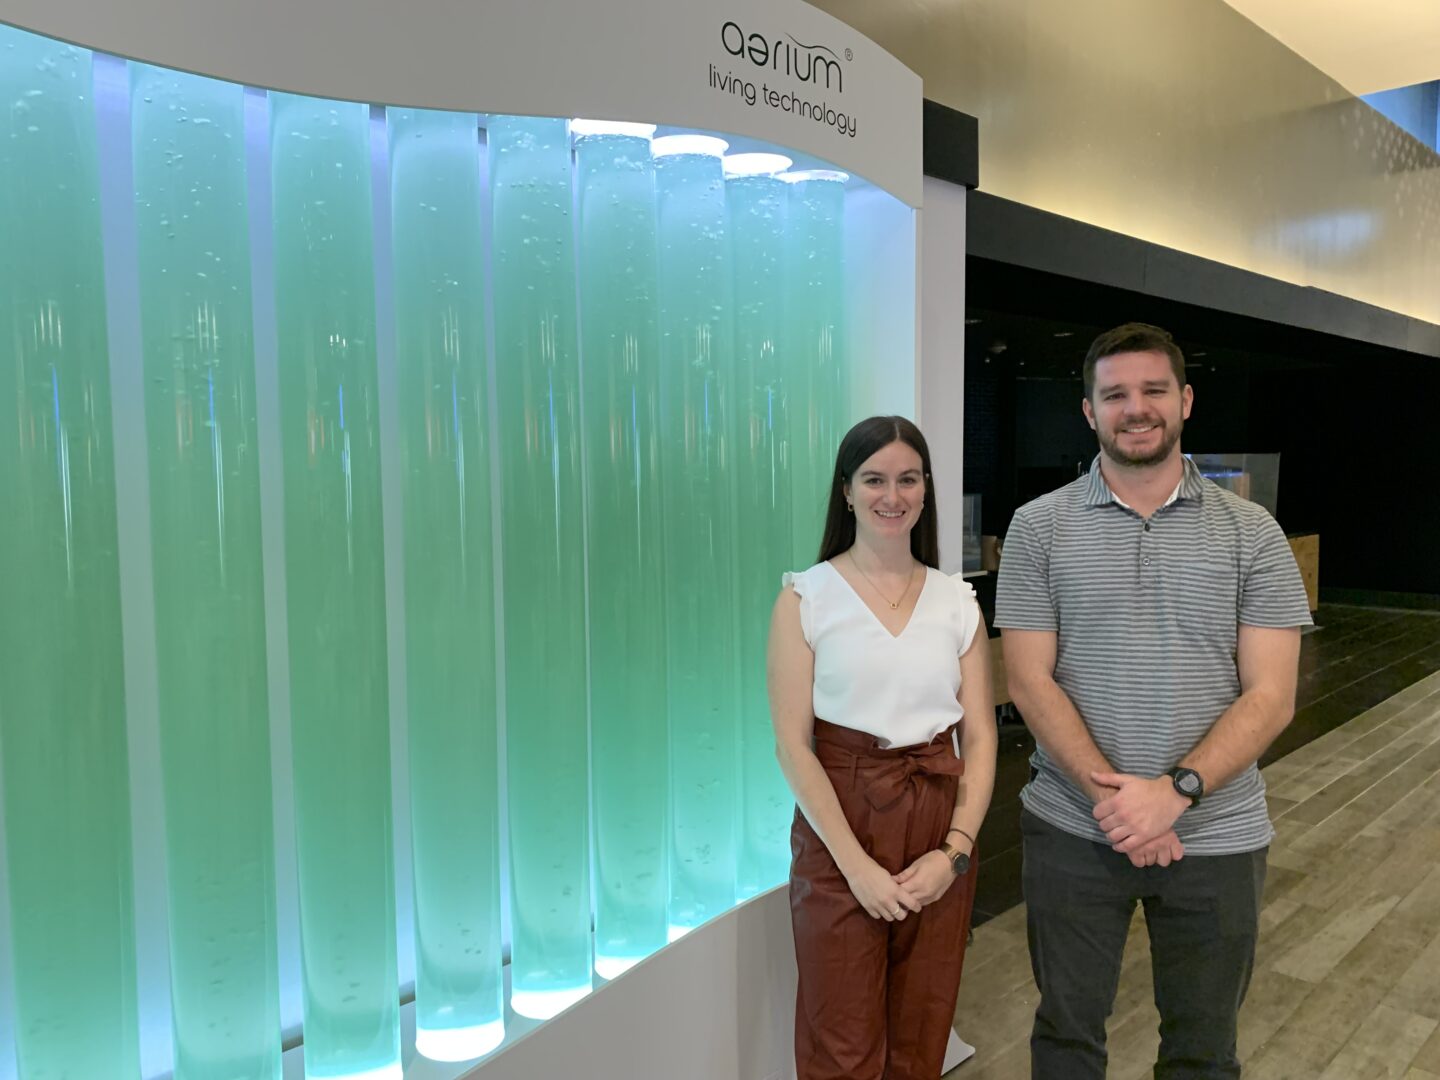 Kelsey Abernathy and Dan Fucich founded Algenair in 2018 while completing their PhDs at the University of Maryland. They are testing their patent-pending air purifier, called an aerium, at the Pittsburgh International Airport. It uses algae to remove carbon dioxide from the air.